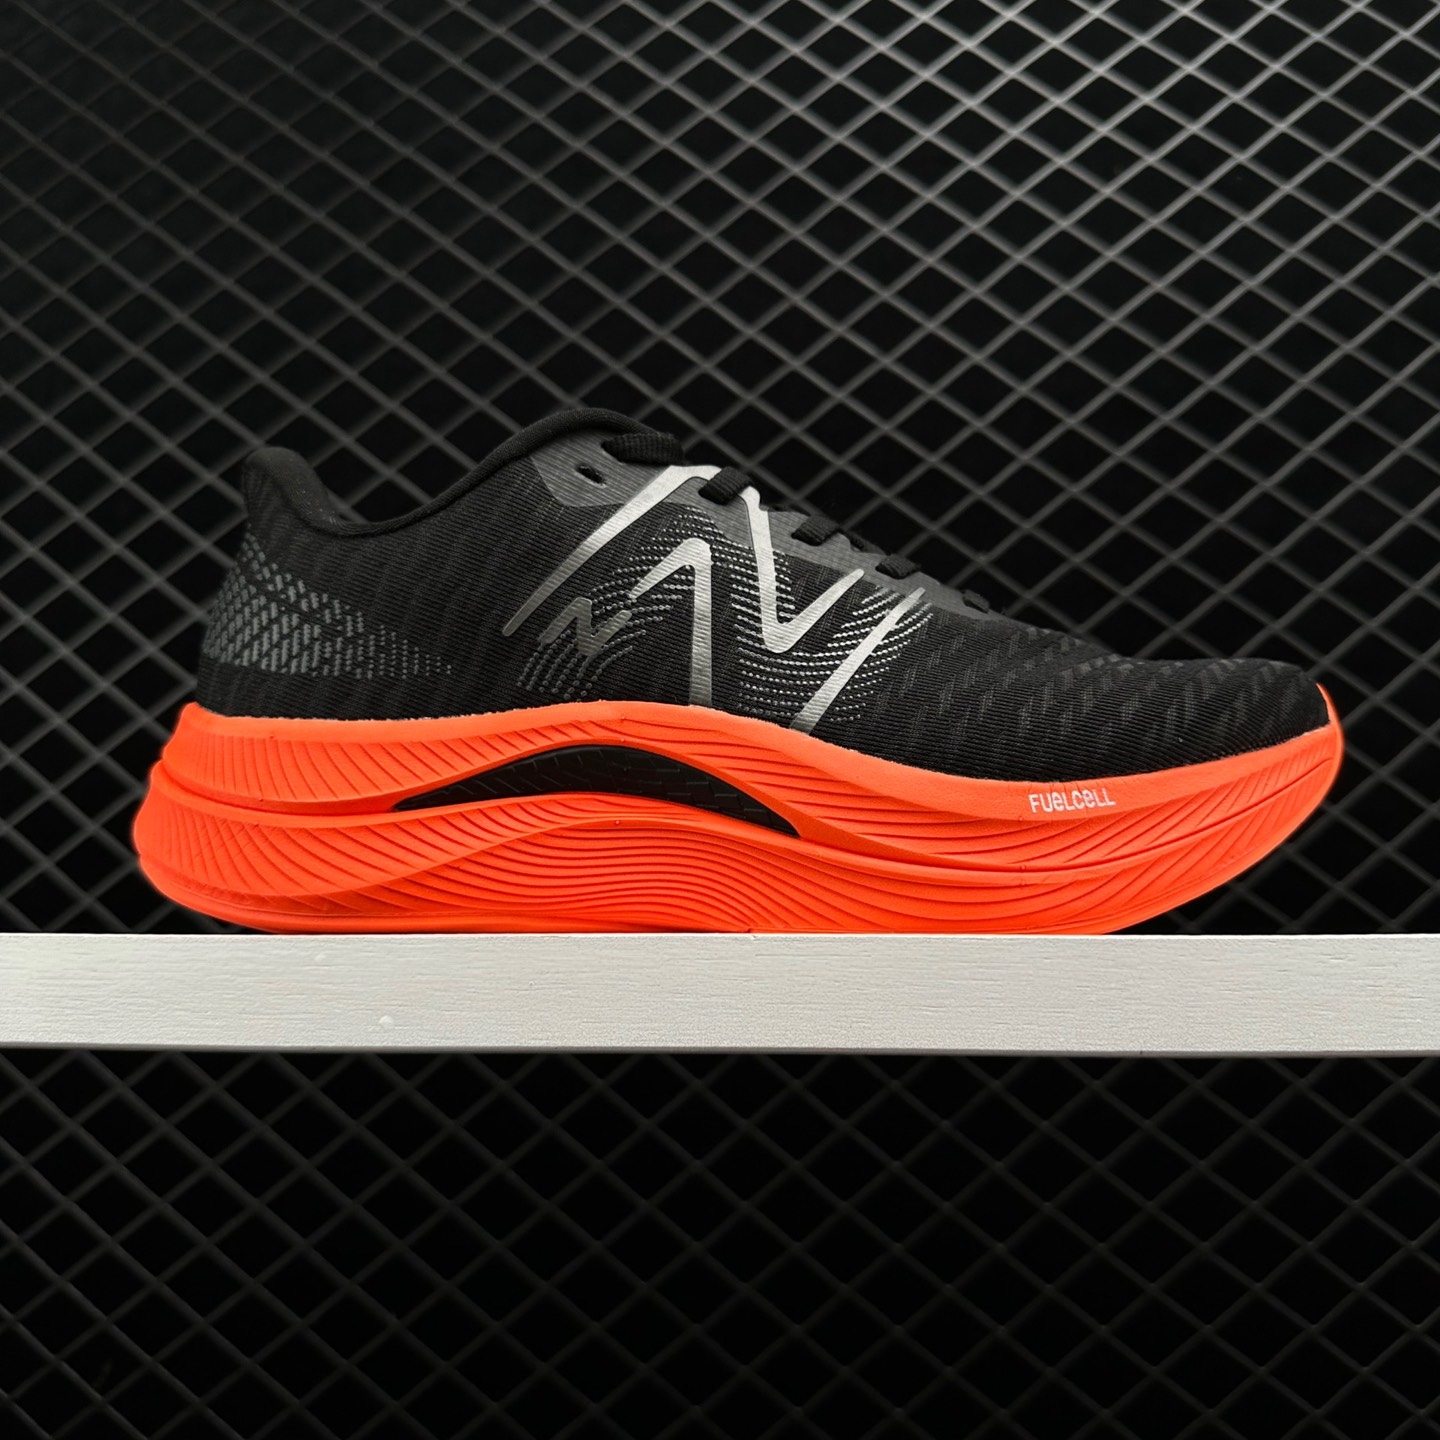 New Balance FuelCell Propel v4 'Black Dragonfly' MFCPRLO4 - Lightweight and Responsive Performance Running Shoes